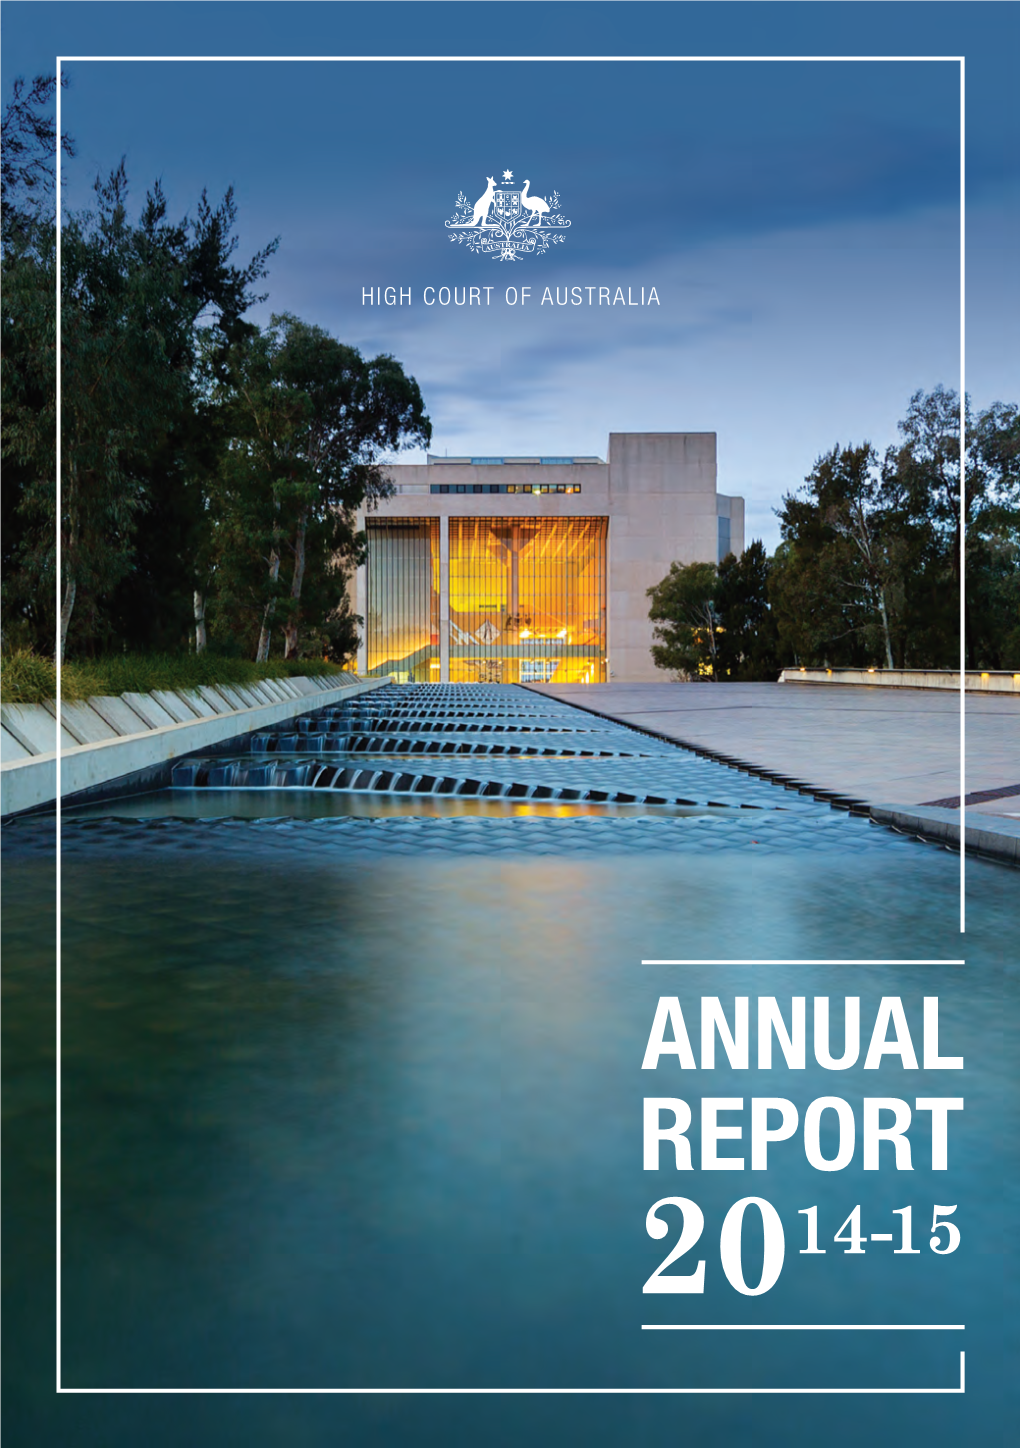 Annual Report for 2014 – 2015